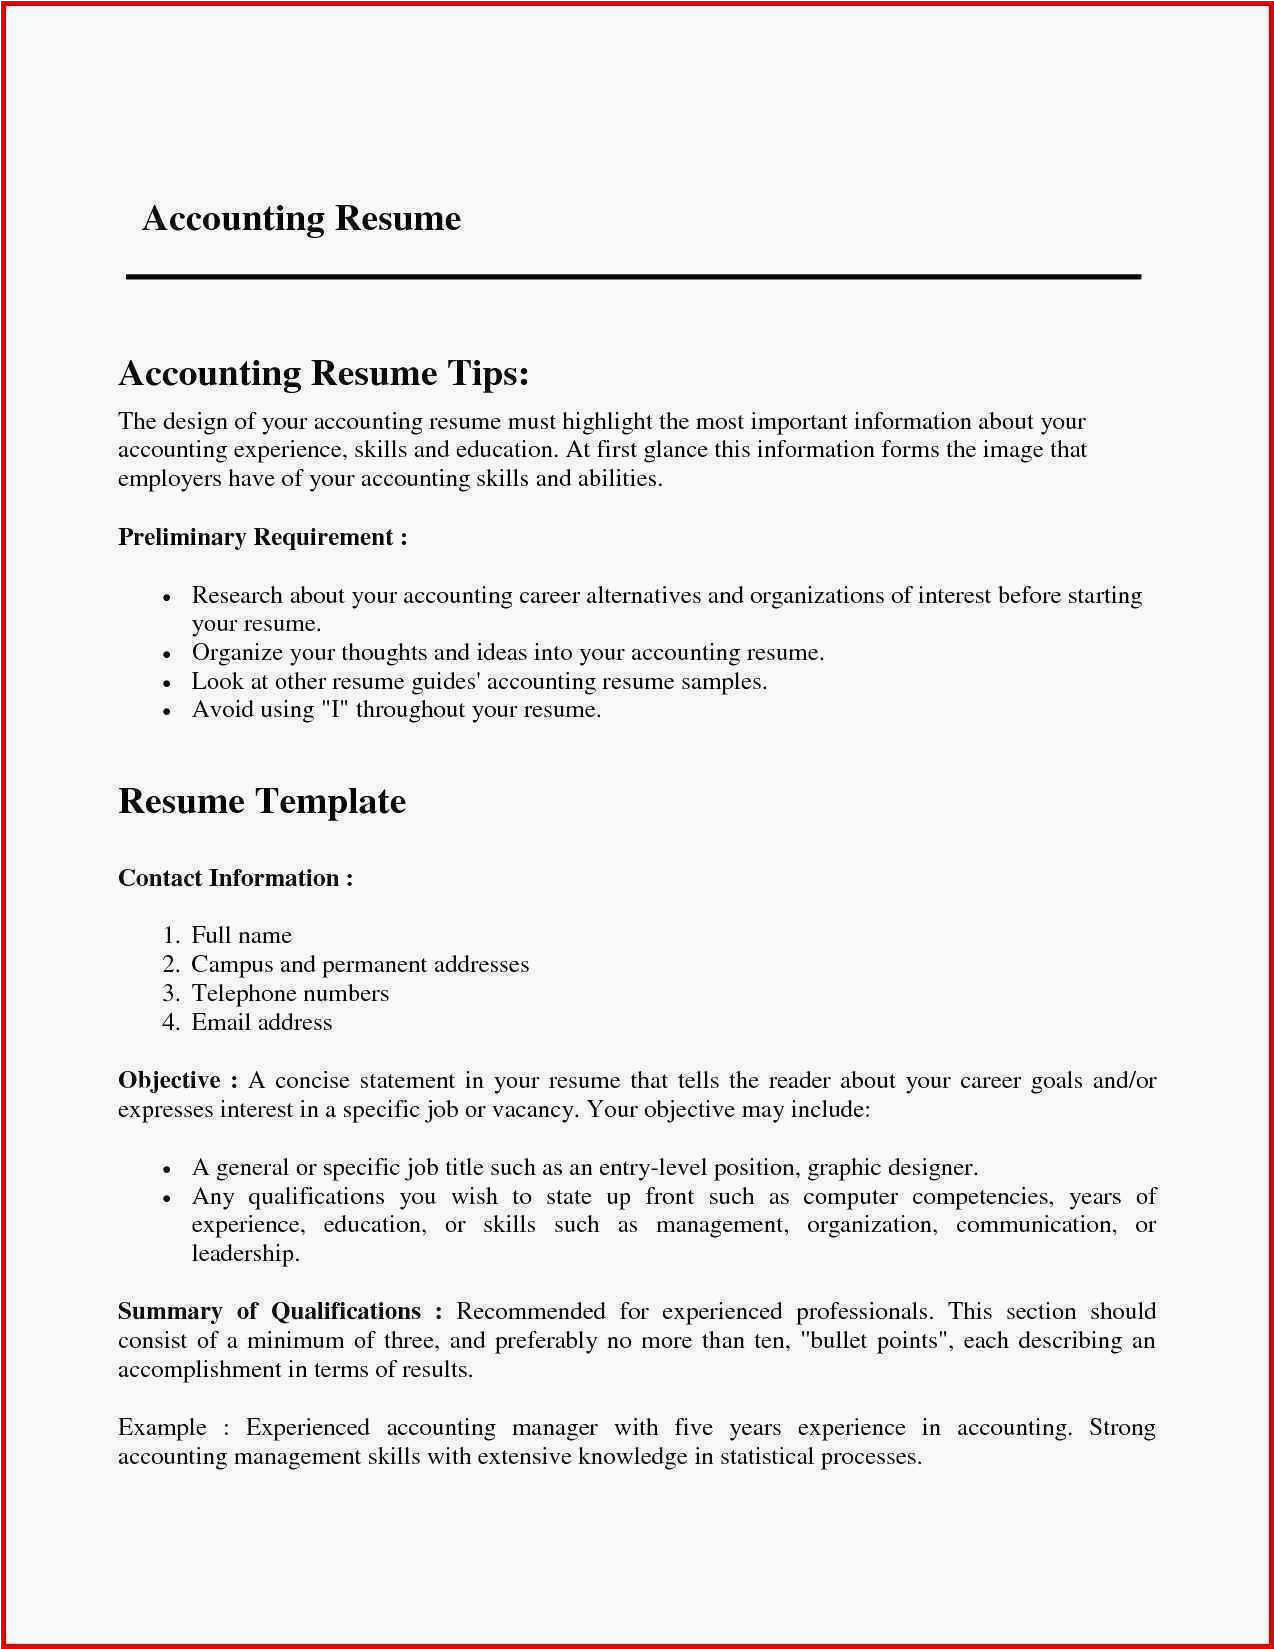 Hr Resume Sample for 3 Years Experience 3 Year Experience Resume format Resume format